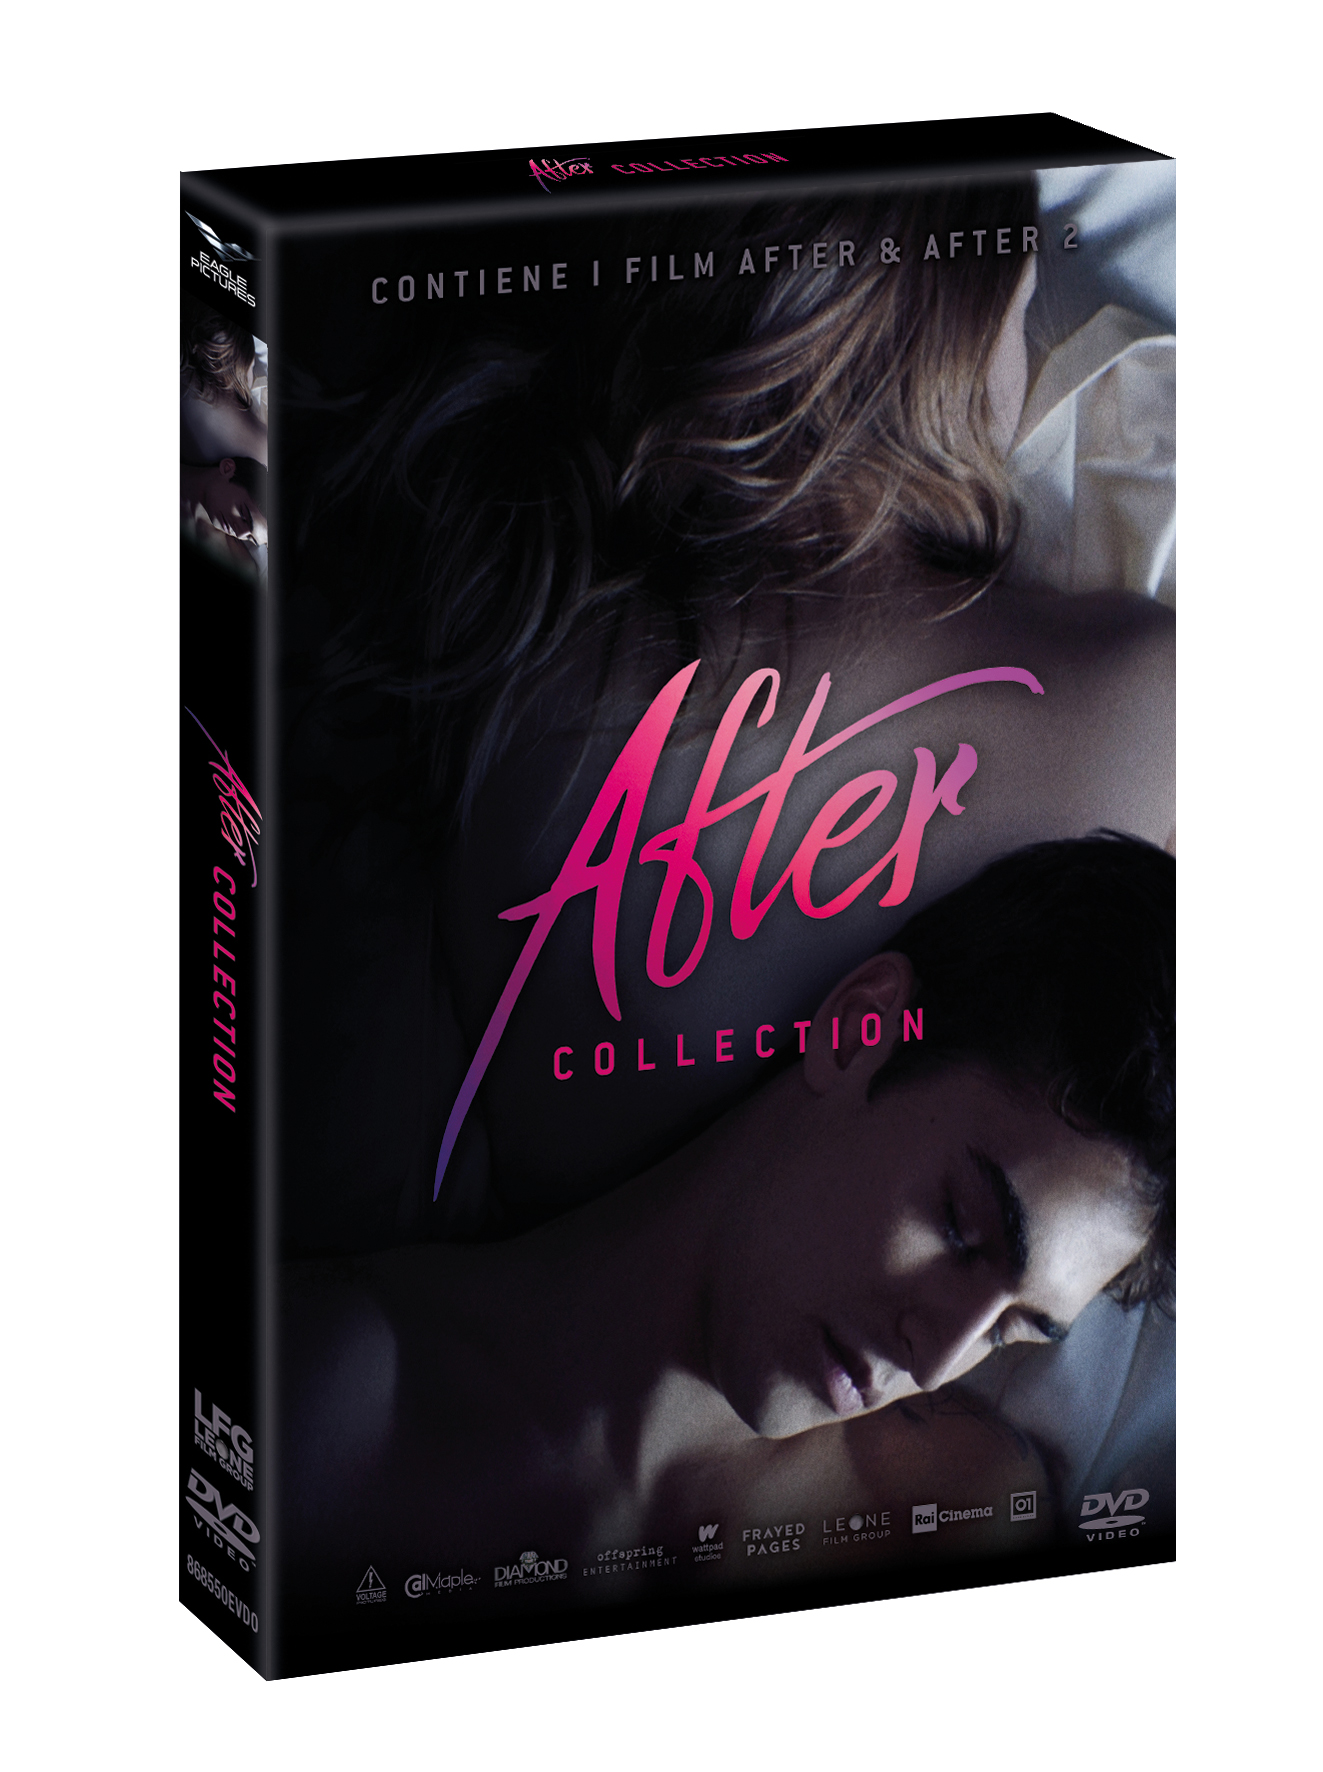 After we Collided book. Collide книга. After we Collided обложка. Пепел любви книга.